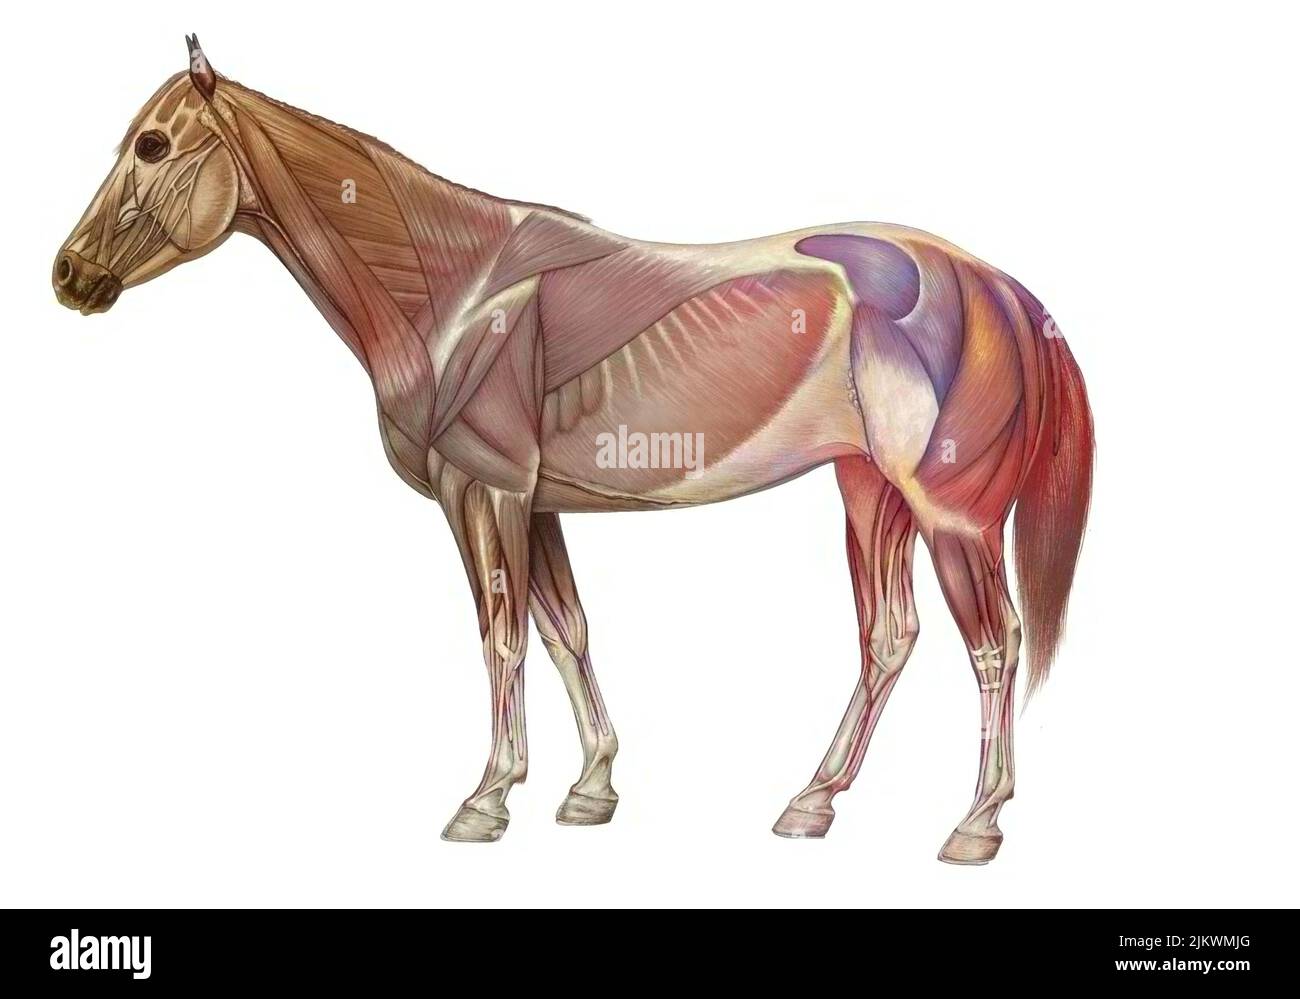 Anatomy of the horse with its muscular system. Stock Photo